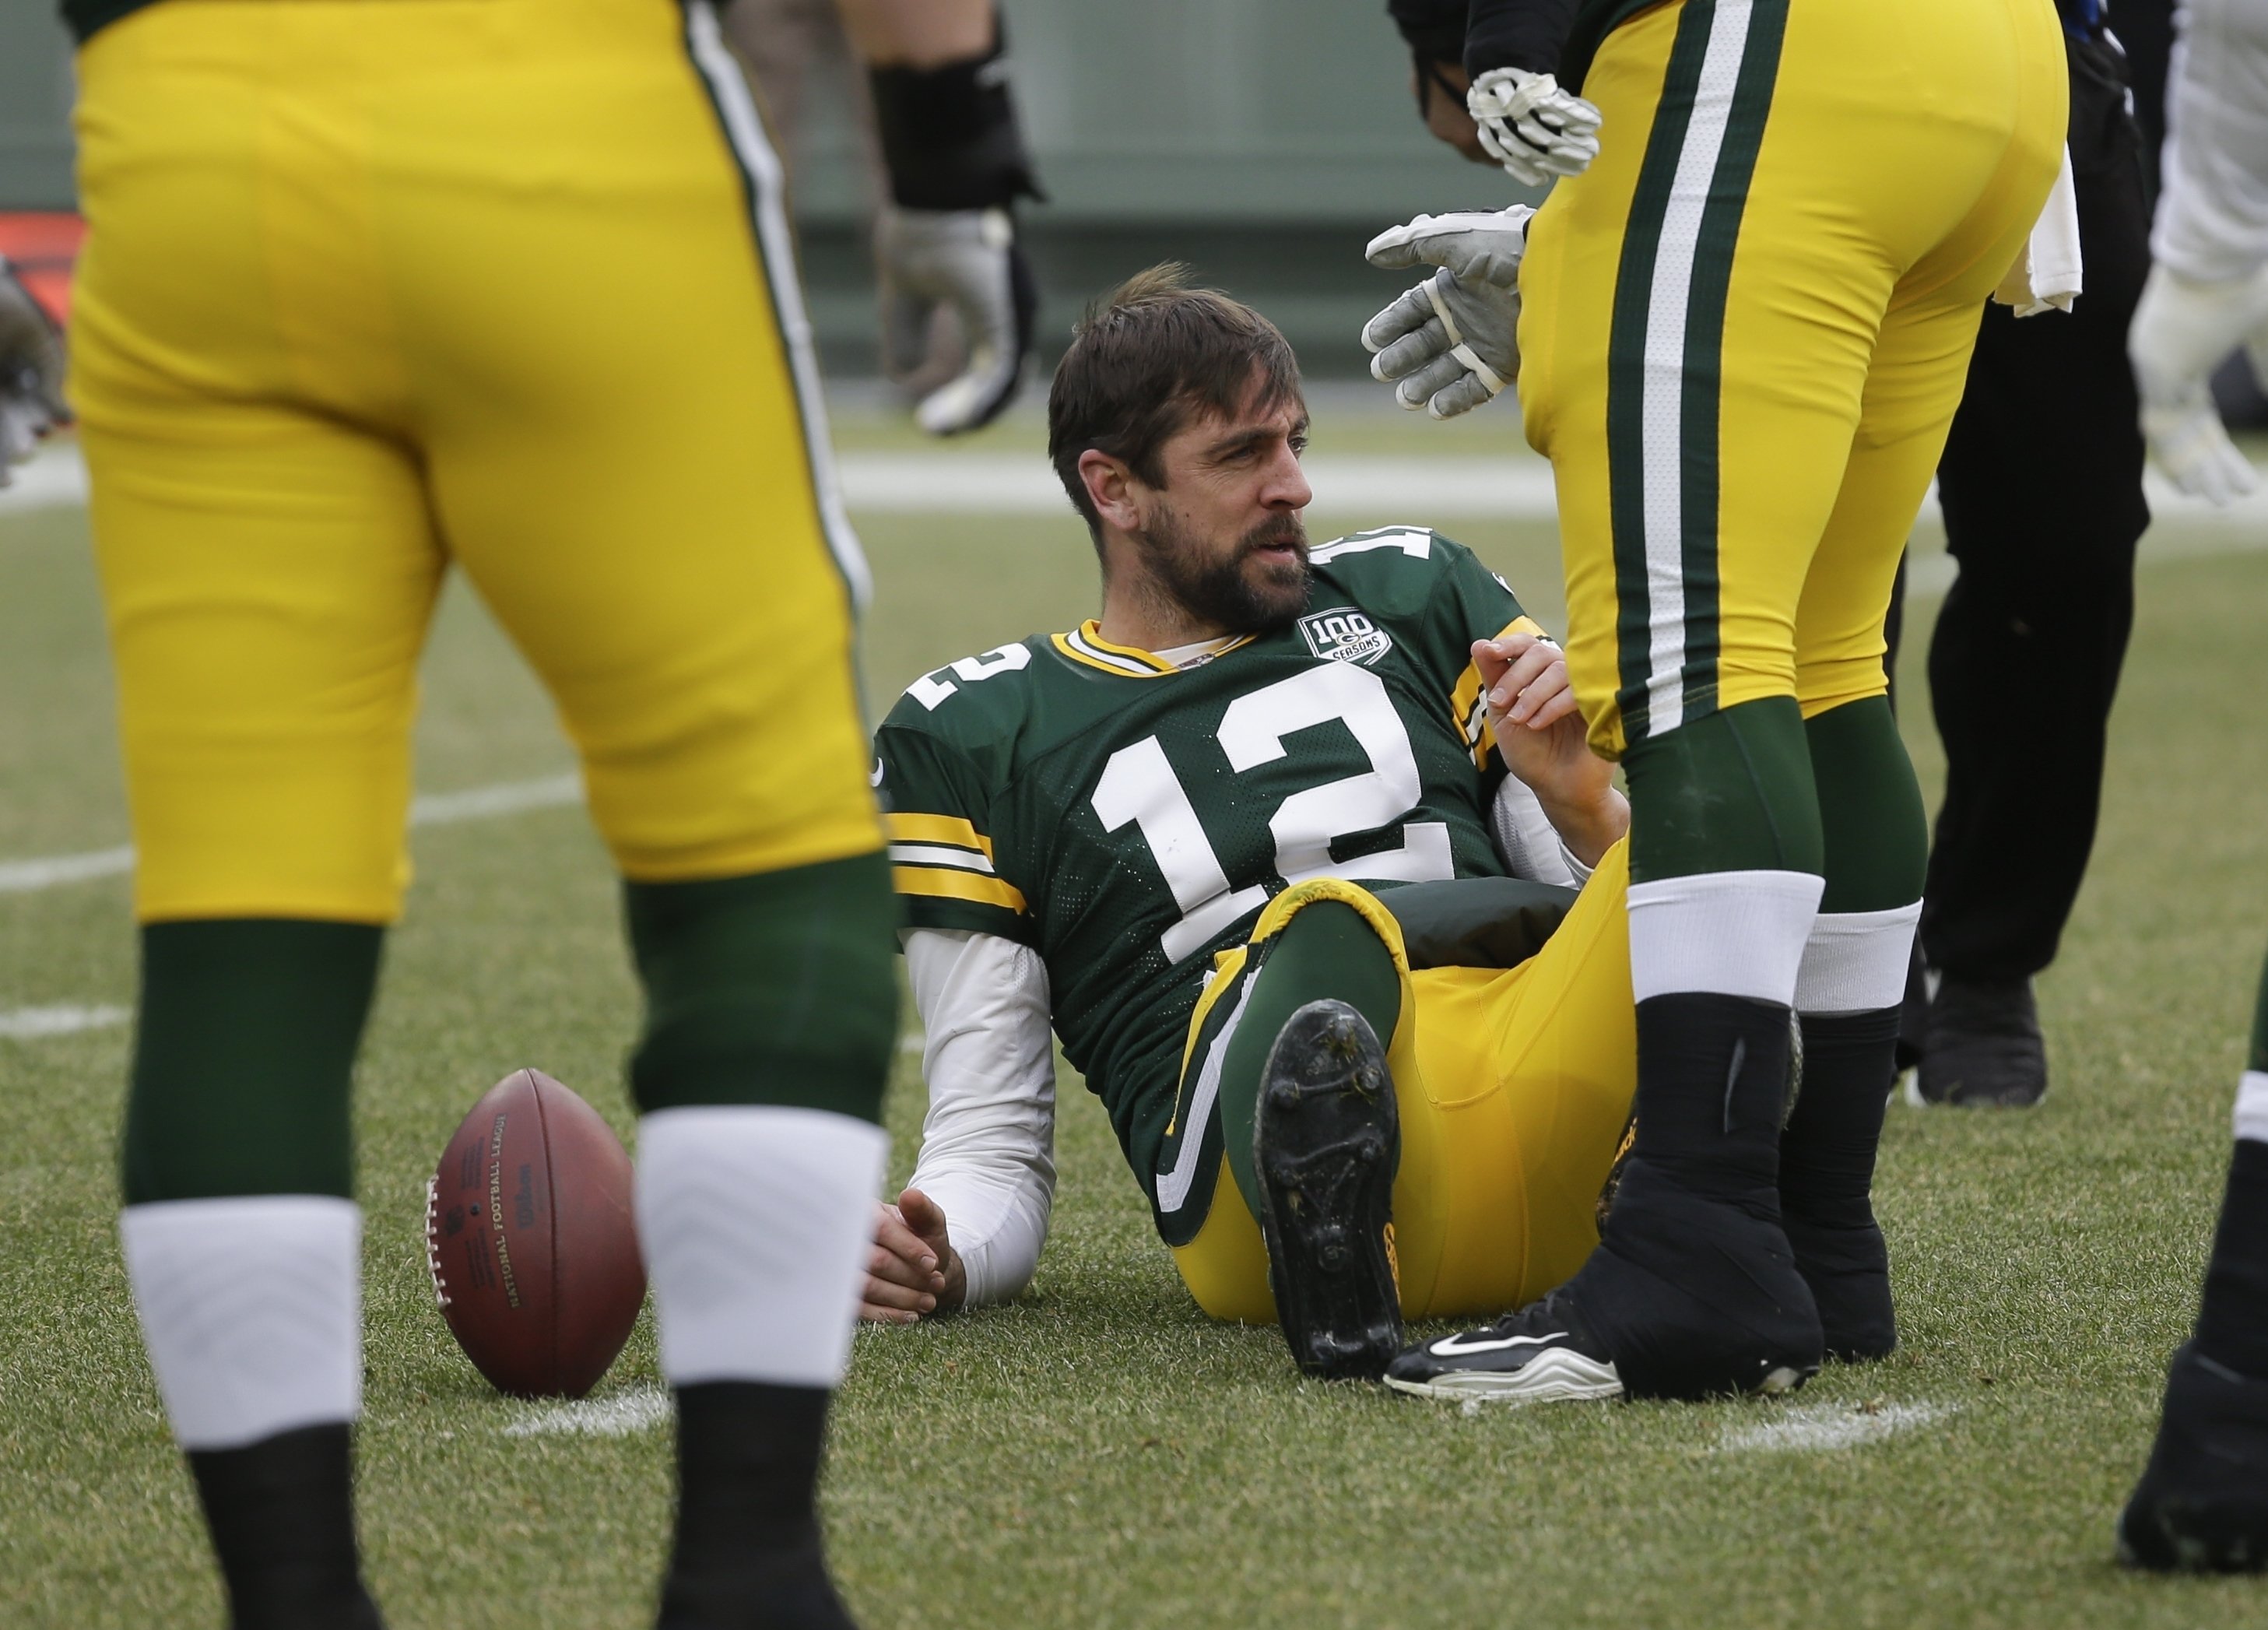 Lions shut out Packers; Rodgers suffers concussion